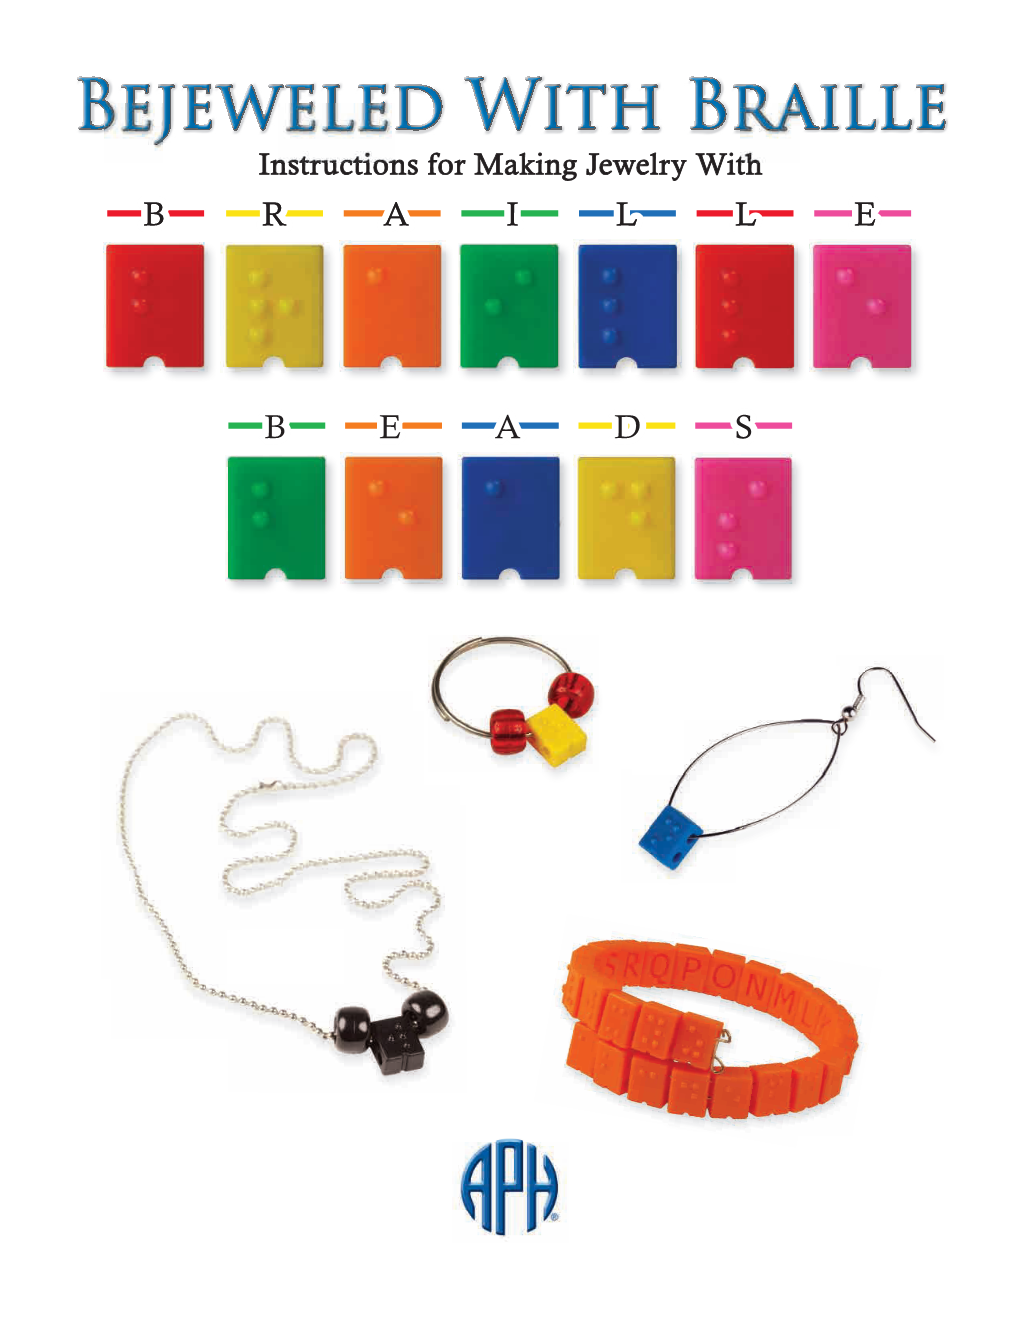 Bejeweled with Braille Instructions for Making Jewelry with BRAILLE